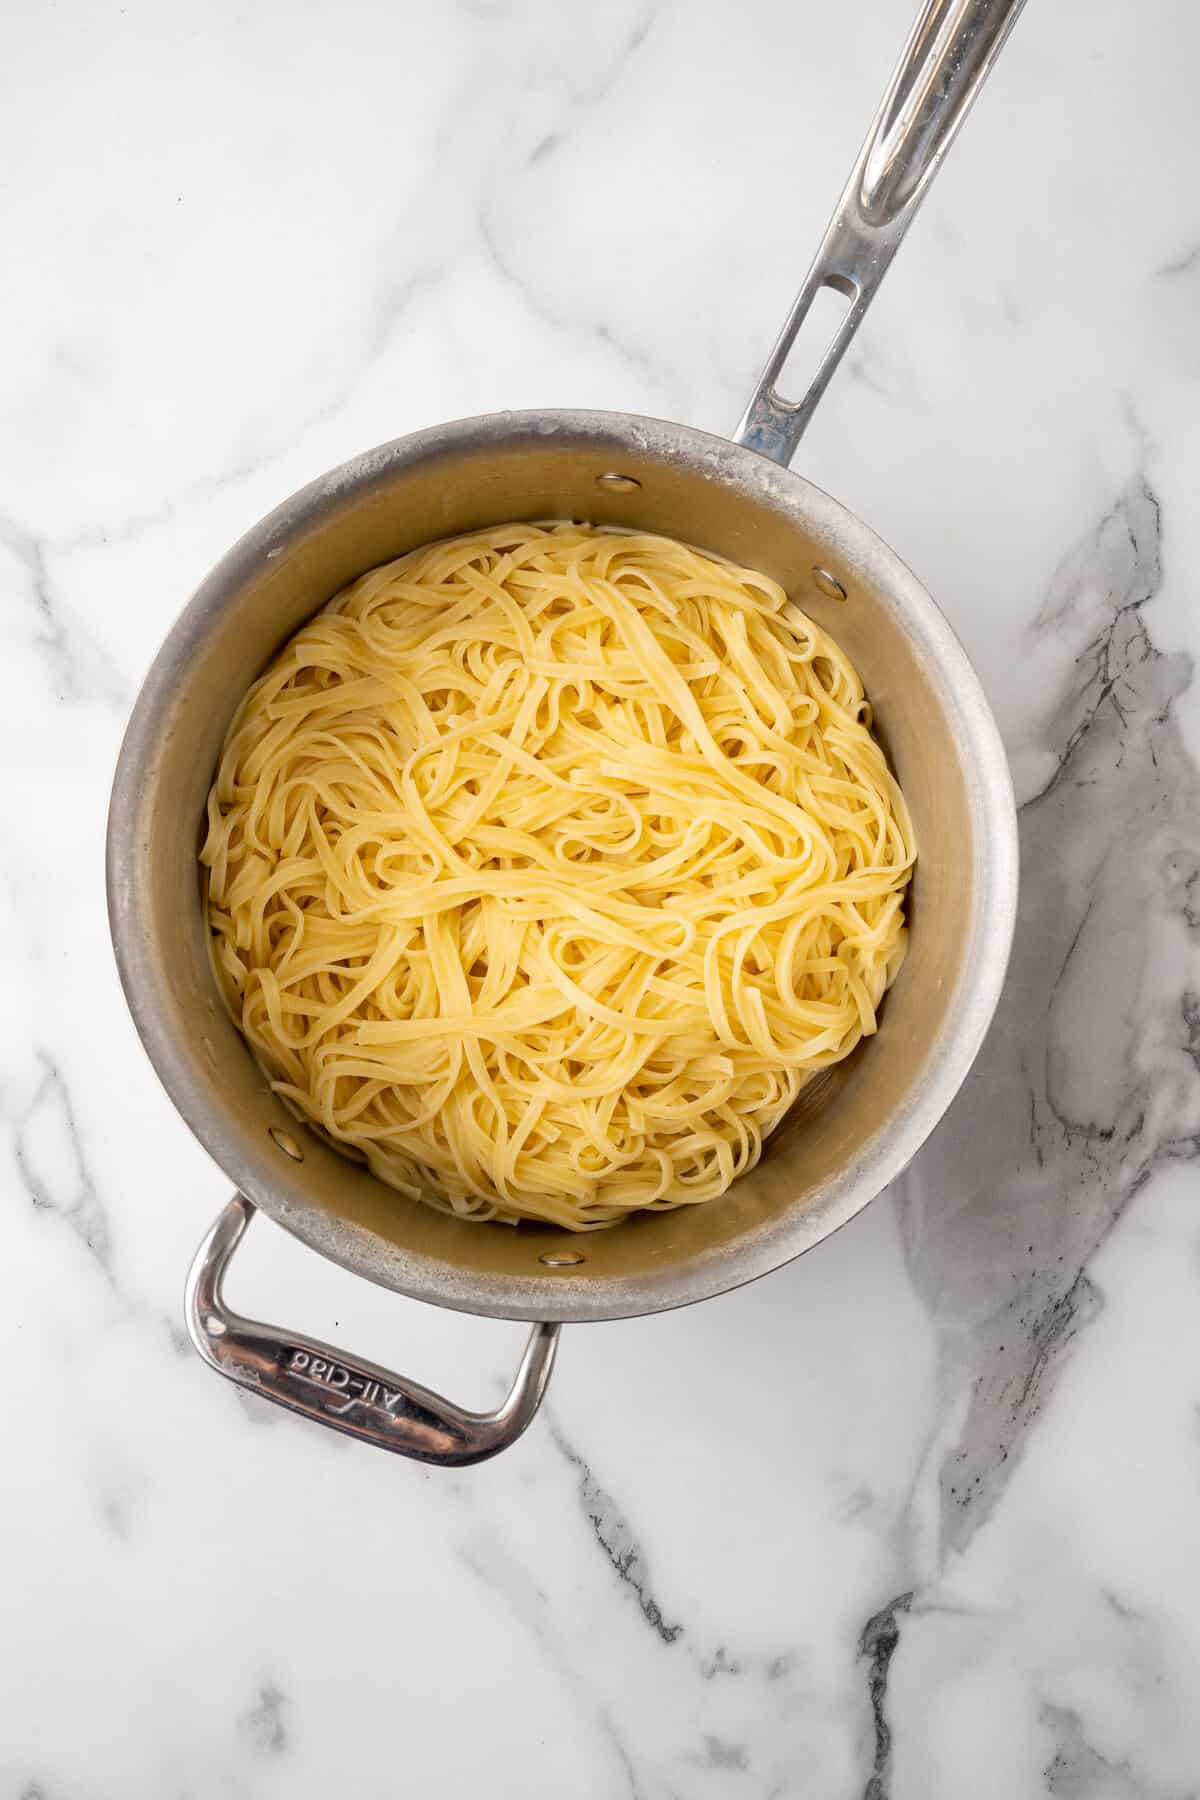 Cooked spaghetti in a stainless steel pot on a marble countertop for an Alfredo recipe.